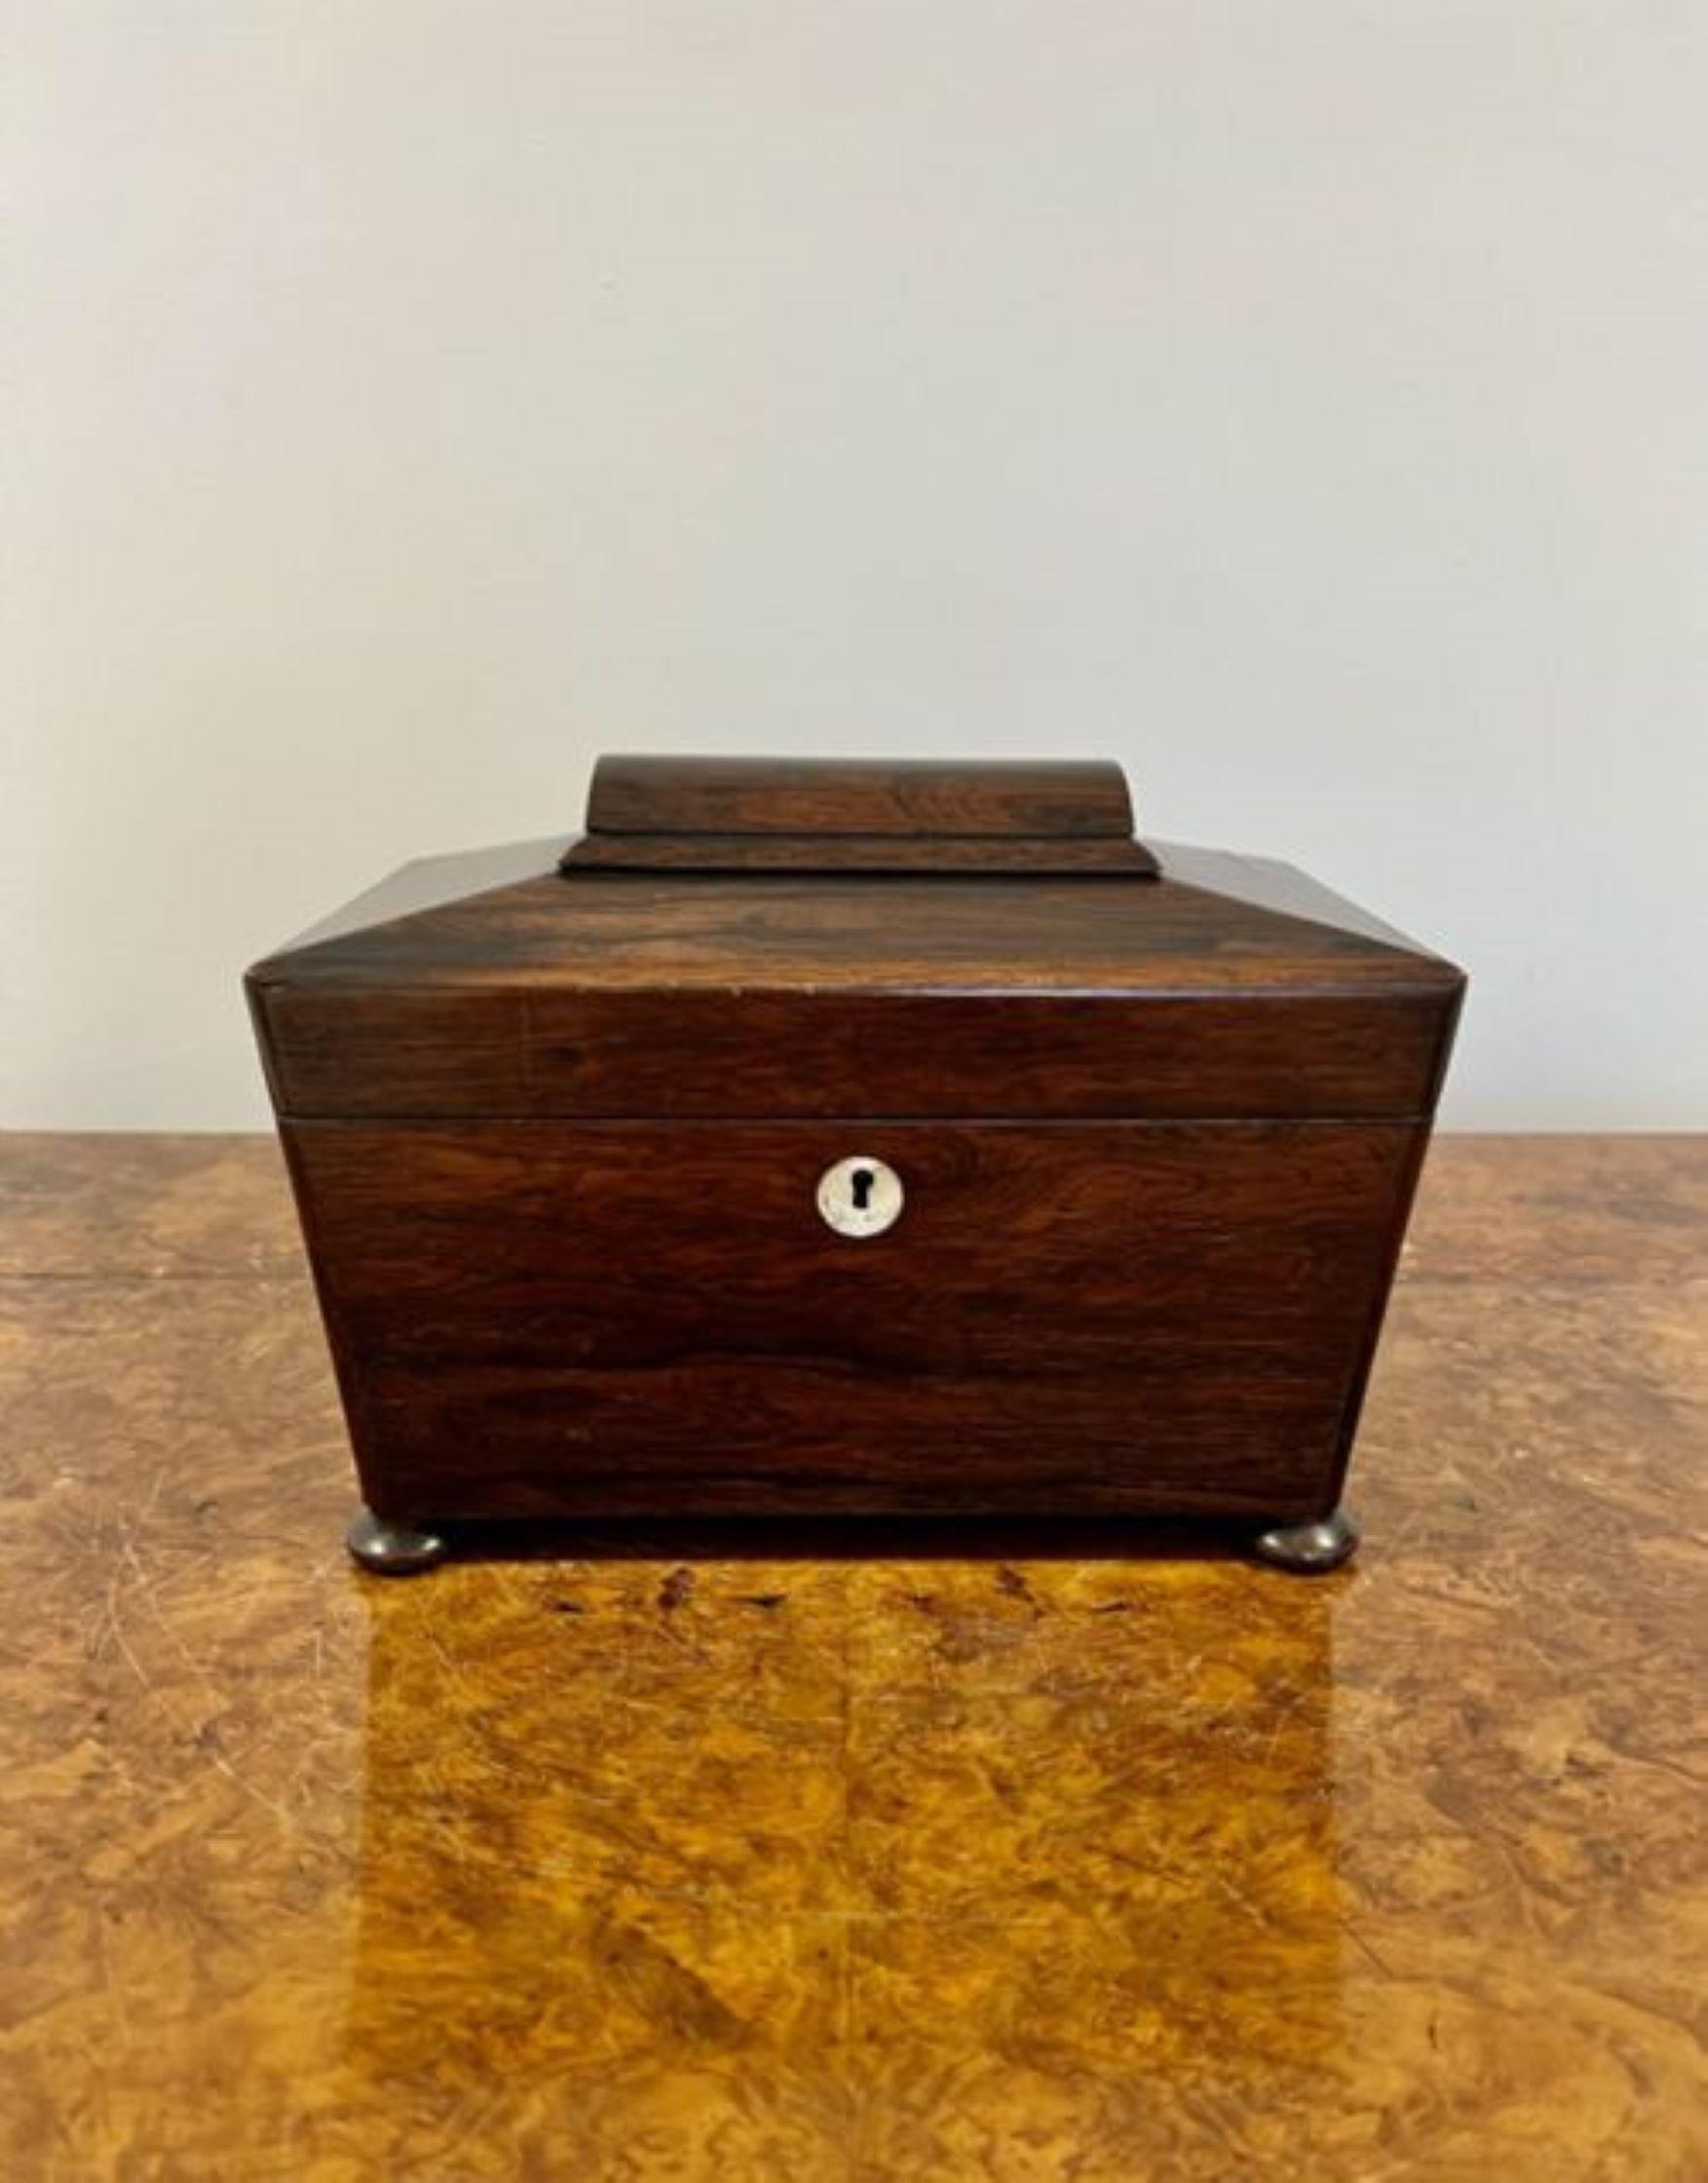 Quality antique 19th Century William IV rosewood tea caddy, having a quality shaped rosewood top opening to reveal a fitted interior of a glass tea mixing bowl and a tea lidded compartment for tea, standing on original bun feet.

D. 1835